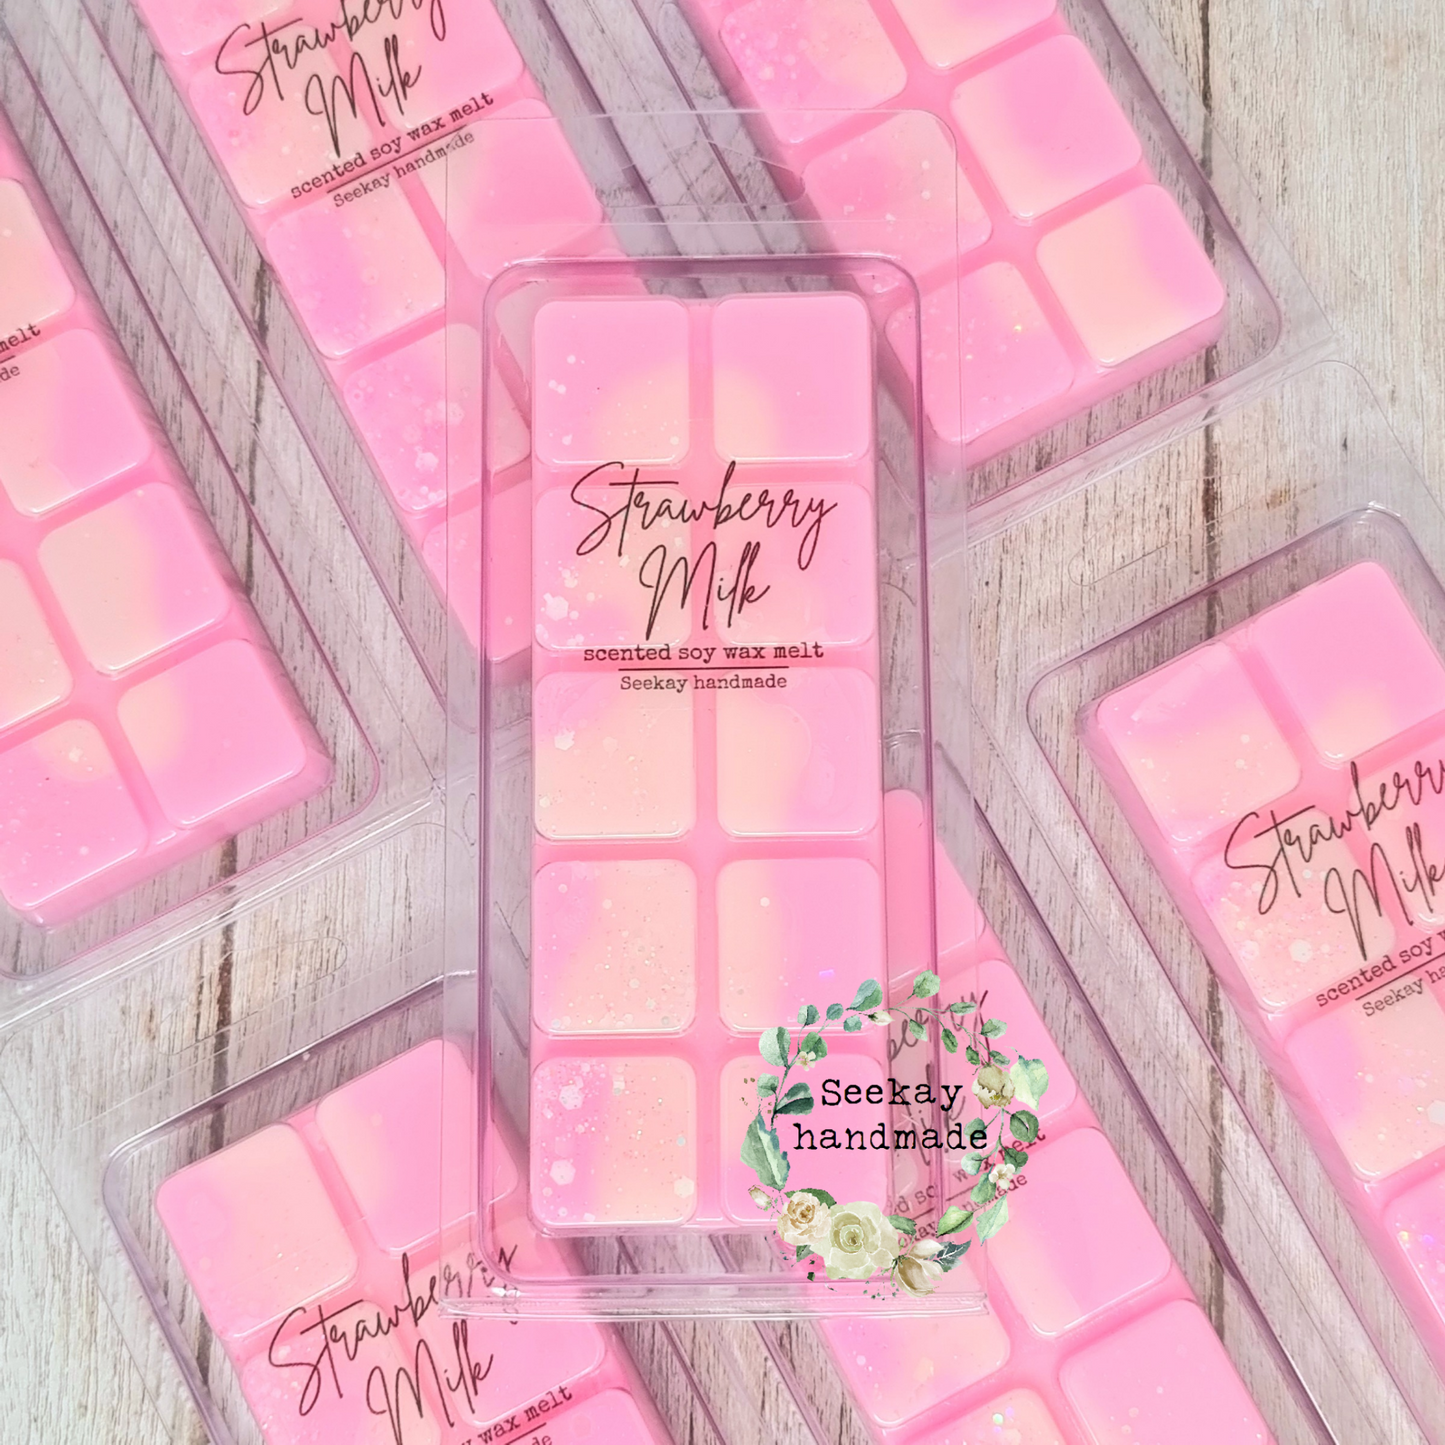 Strawberry Milk scented soy wax melt